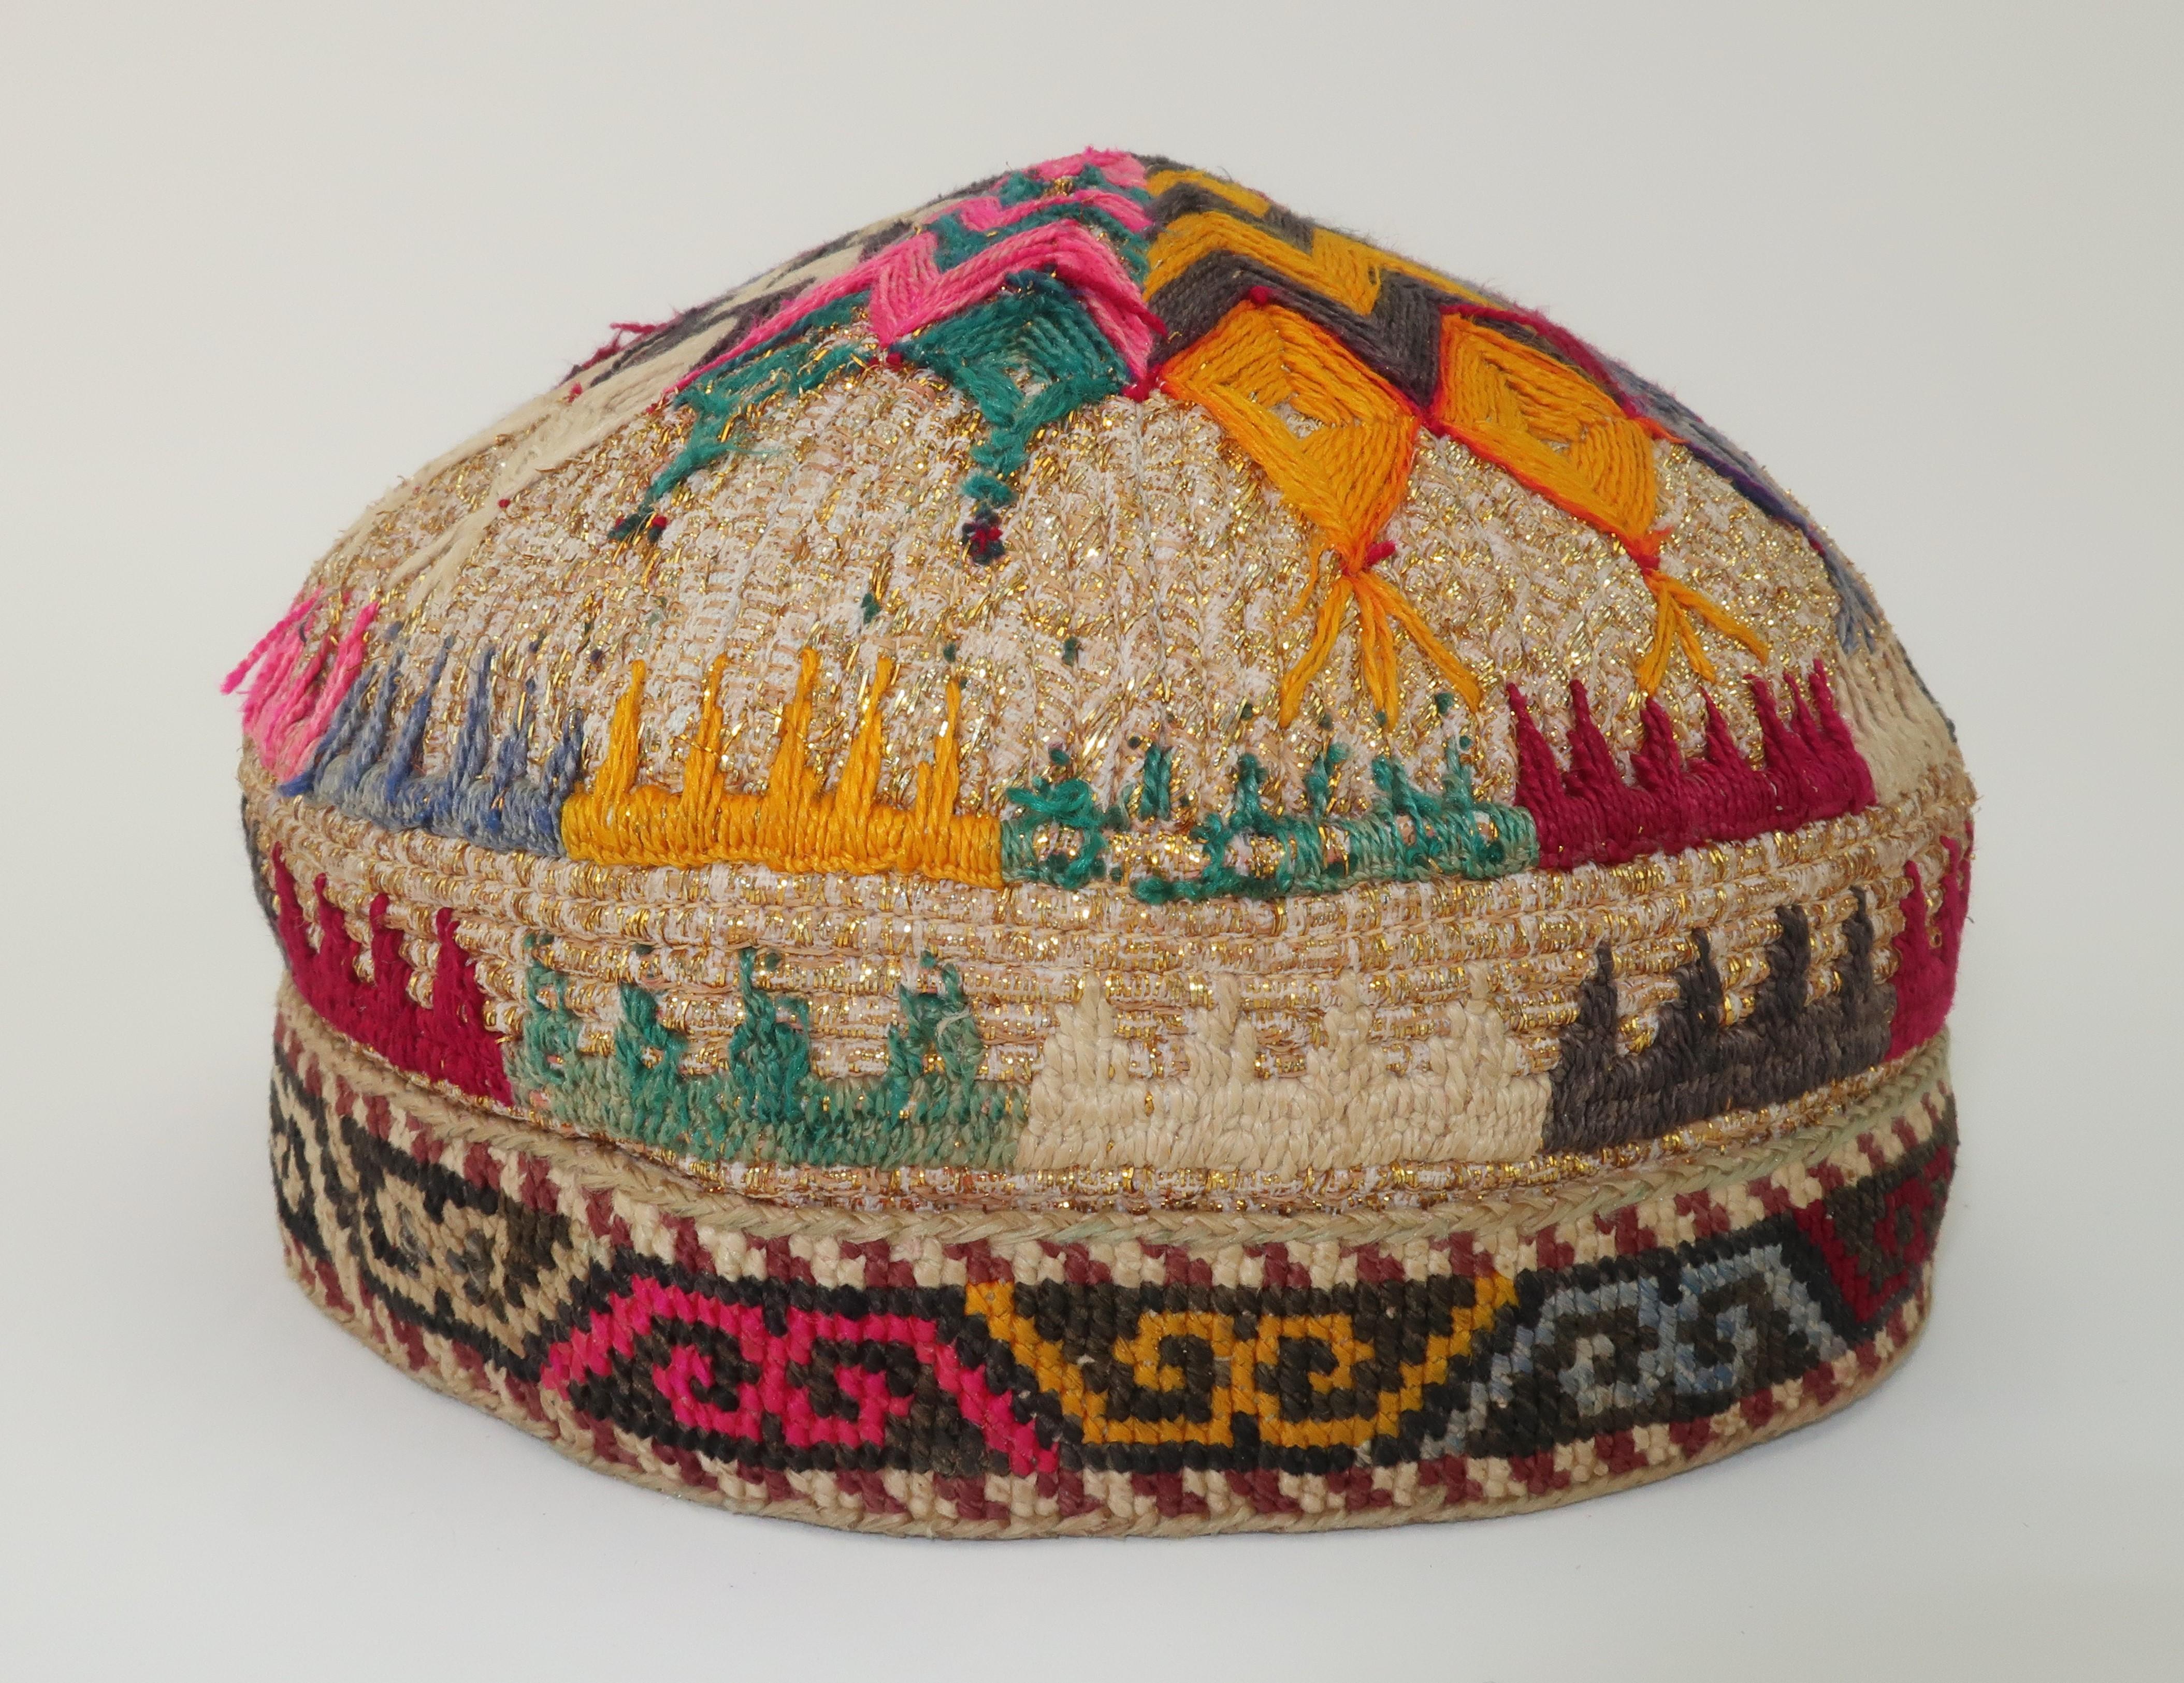 Women's or Men's Early 20th Century Colorful Central Asian Embroidered Hat For Sale